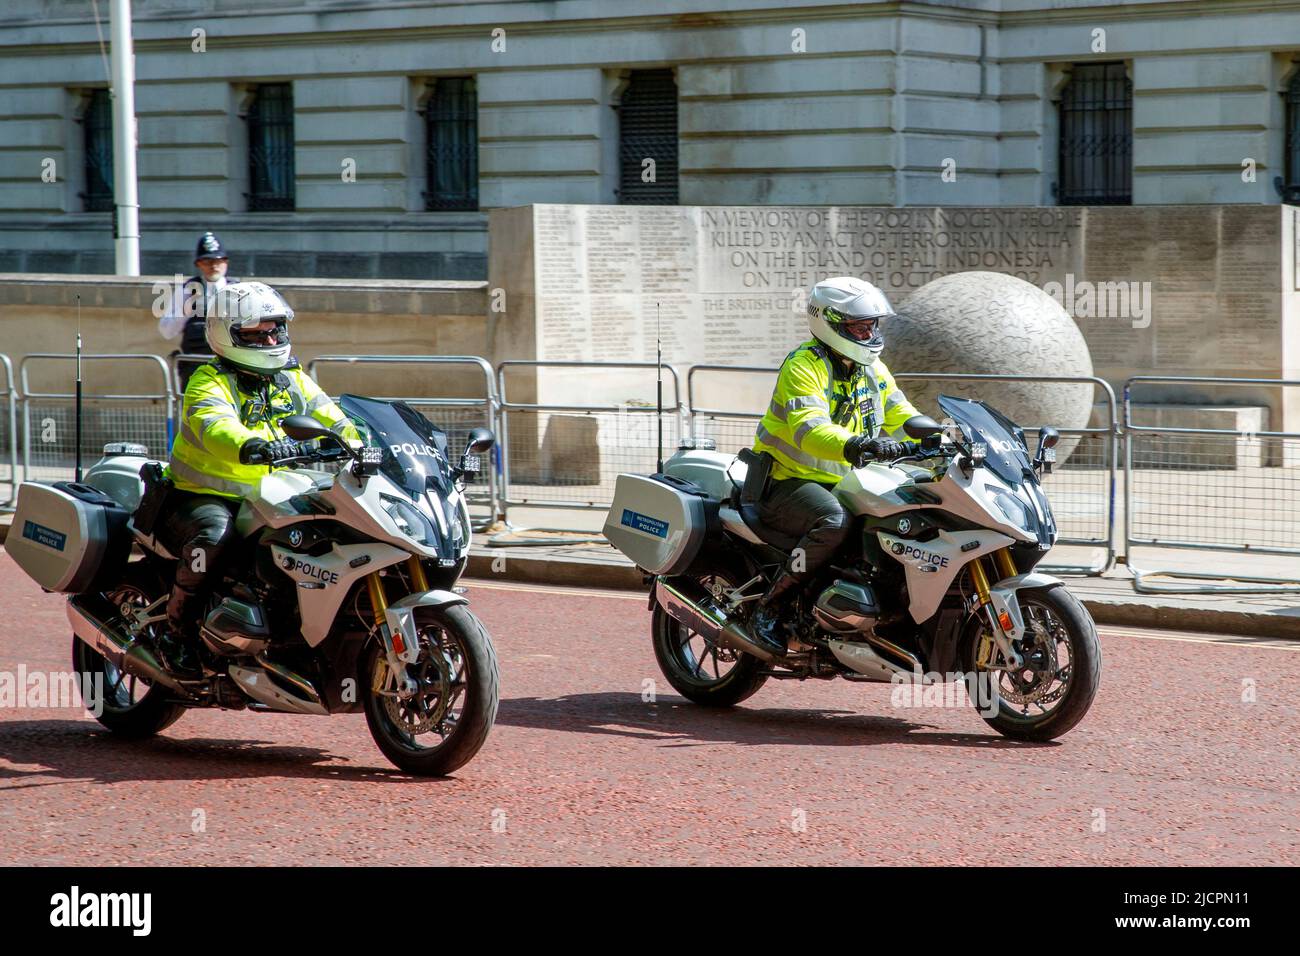 Police Special Escort Group motorcyclists in London, England, United Kingdom on Wednesday, May 18, 2022.Photo: David Rowland / One-Image.com Stock Photo